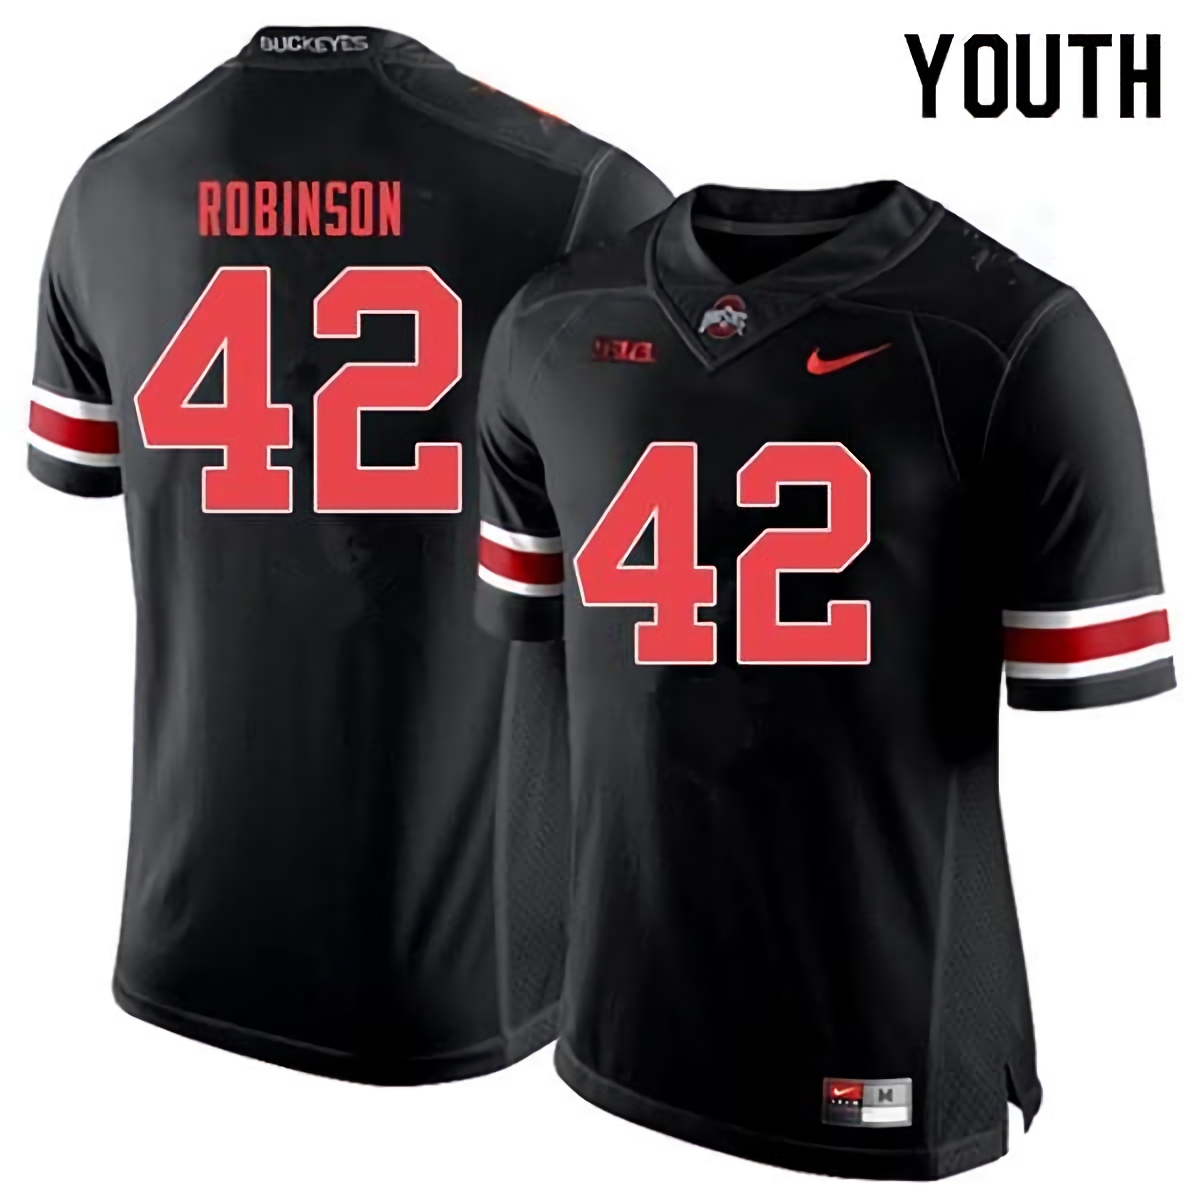 Bradley Robinson Ohio State Buckeyes Youth NCAA #42 Nike Black Out College Stitched Football Jersey IMW2756AX